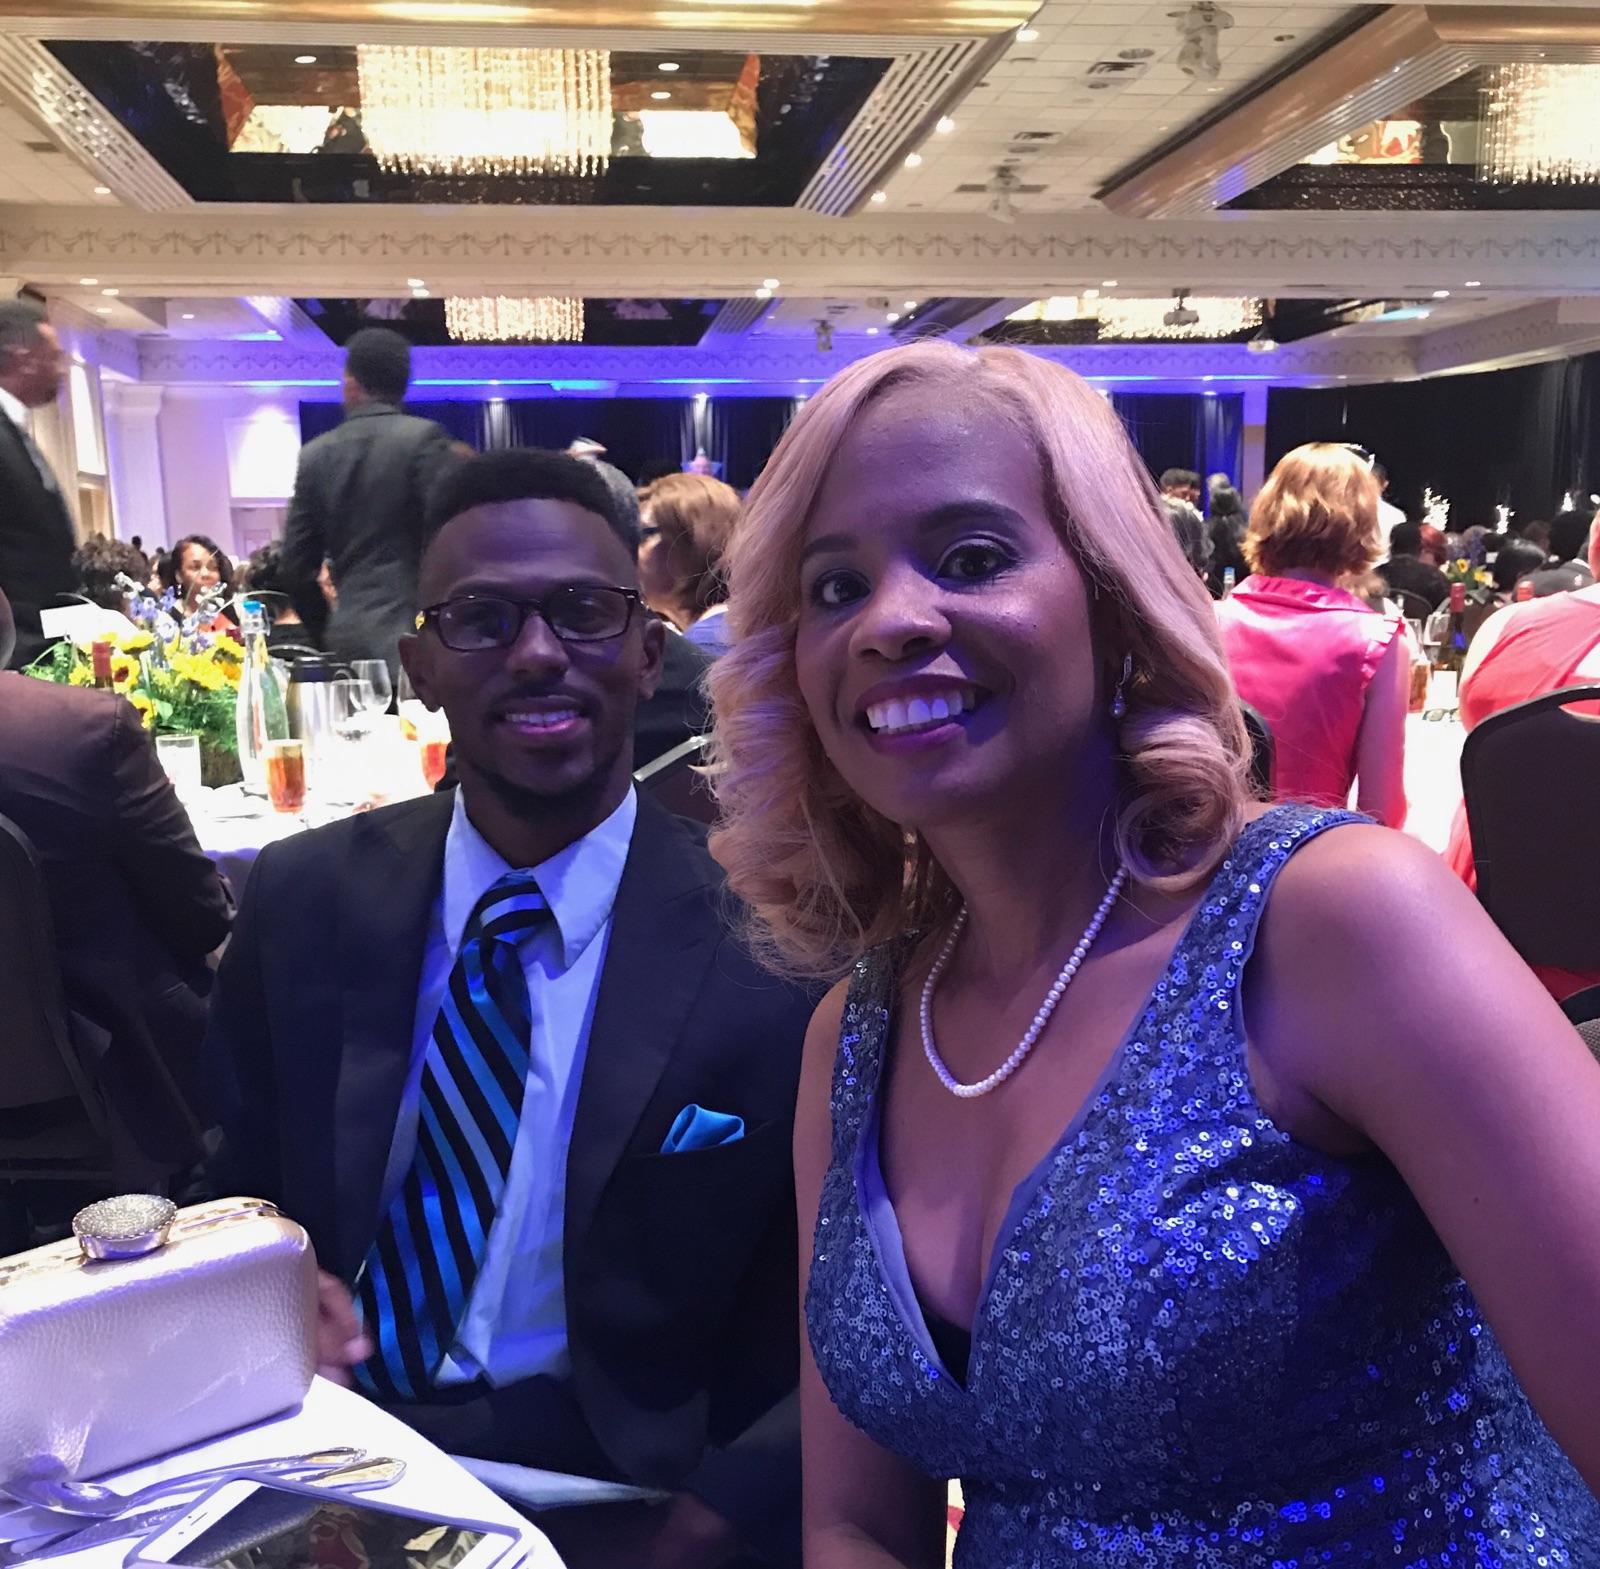 Principal Penn with her husband at the gala honoring educators from across the state